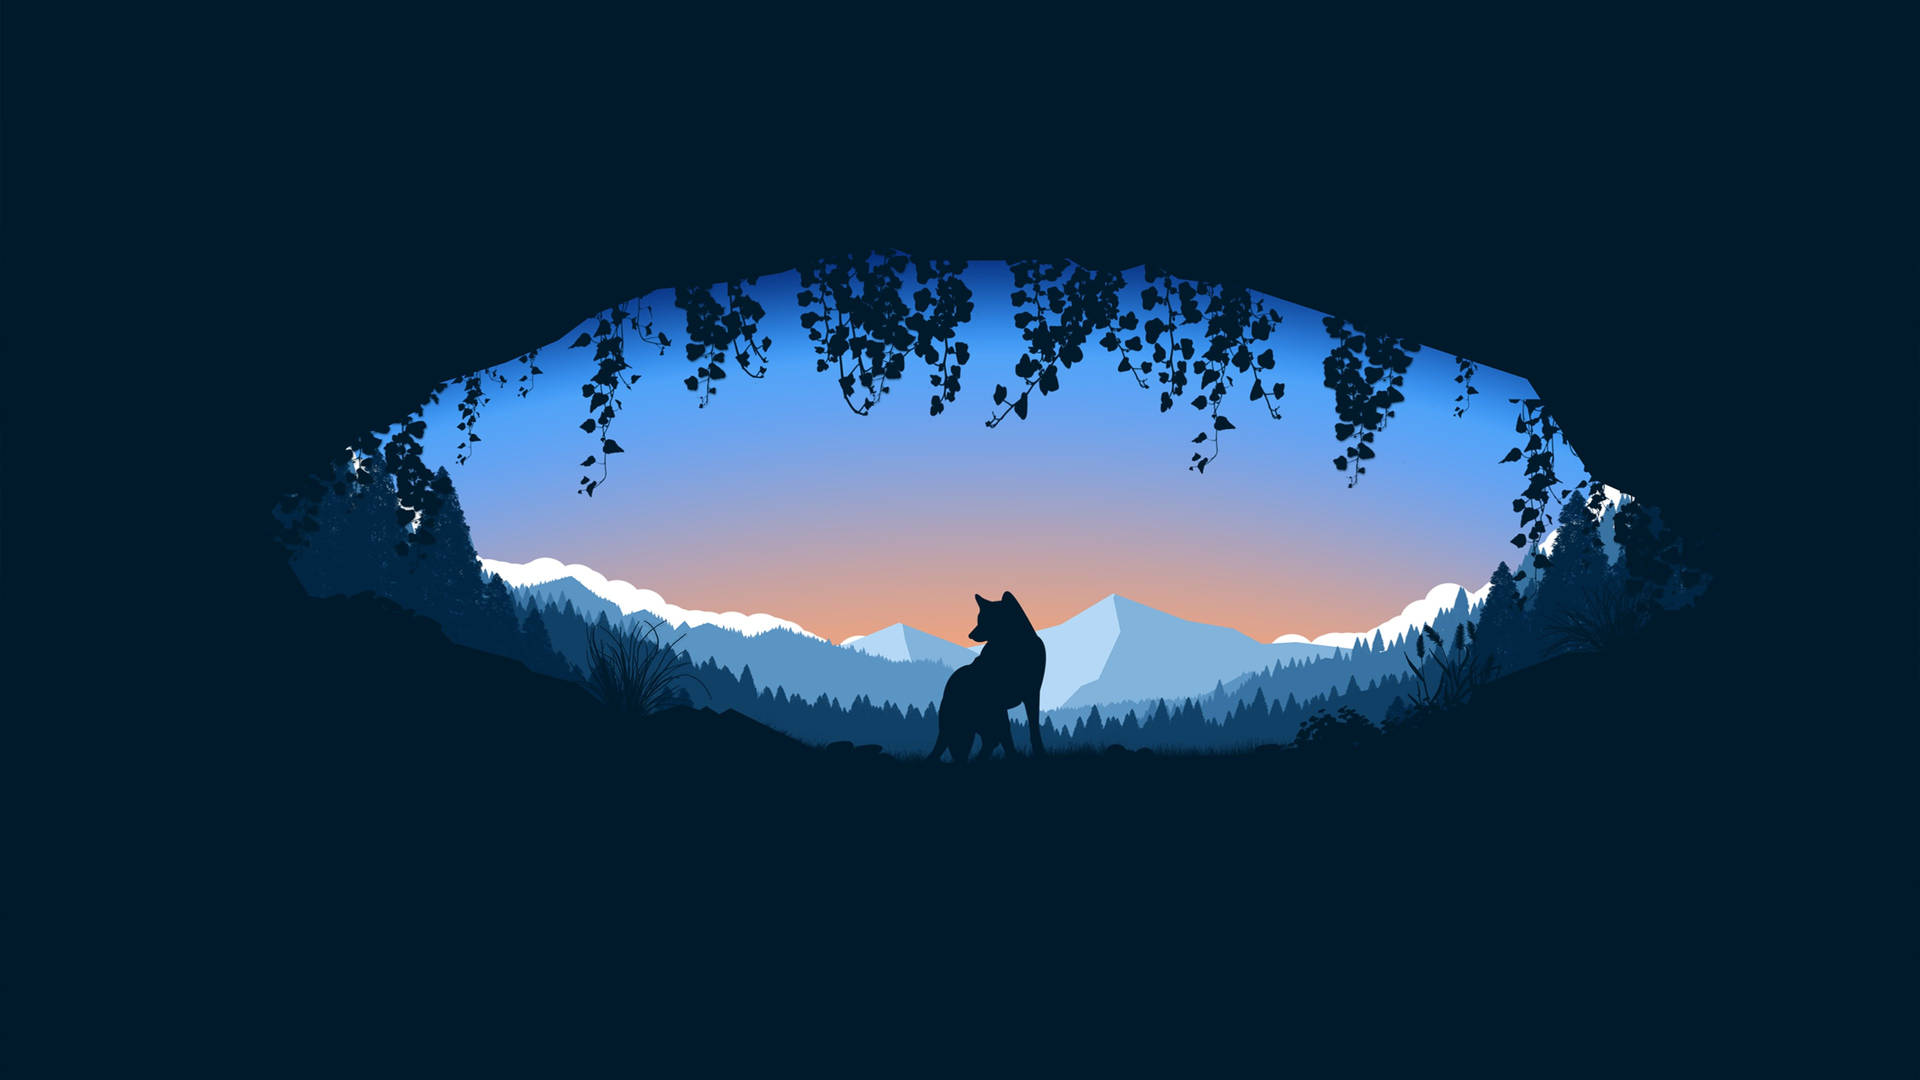 4k Moving Wolf In A Cave Wallpaper